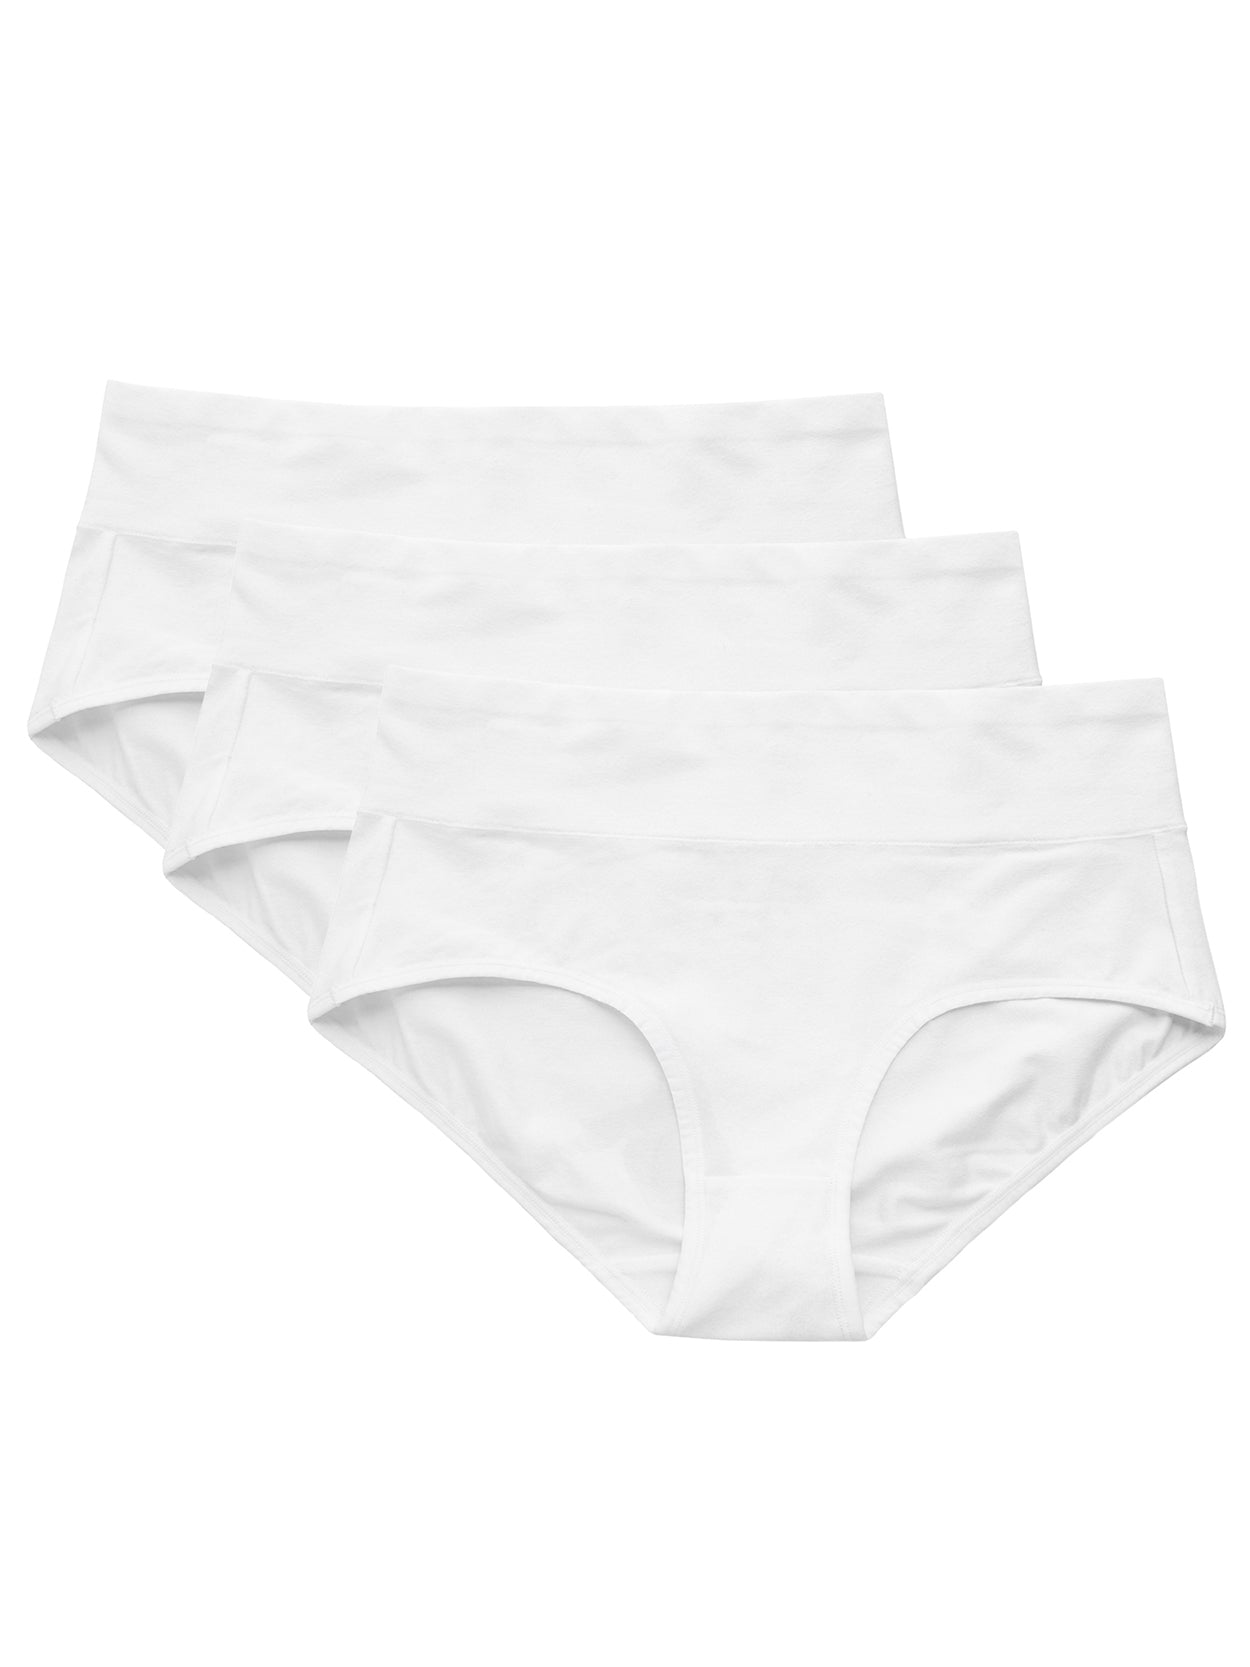 Ogvfunv Women's high-waisted leakage panties, soft and comfortable, sweat-absorbing  and breathable cotton mesh 6 pcs,L White at  Women's Clothing store